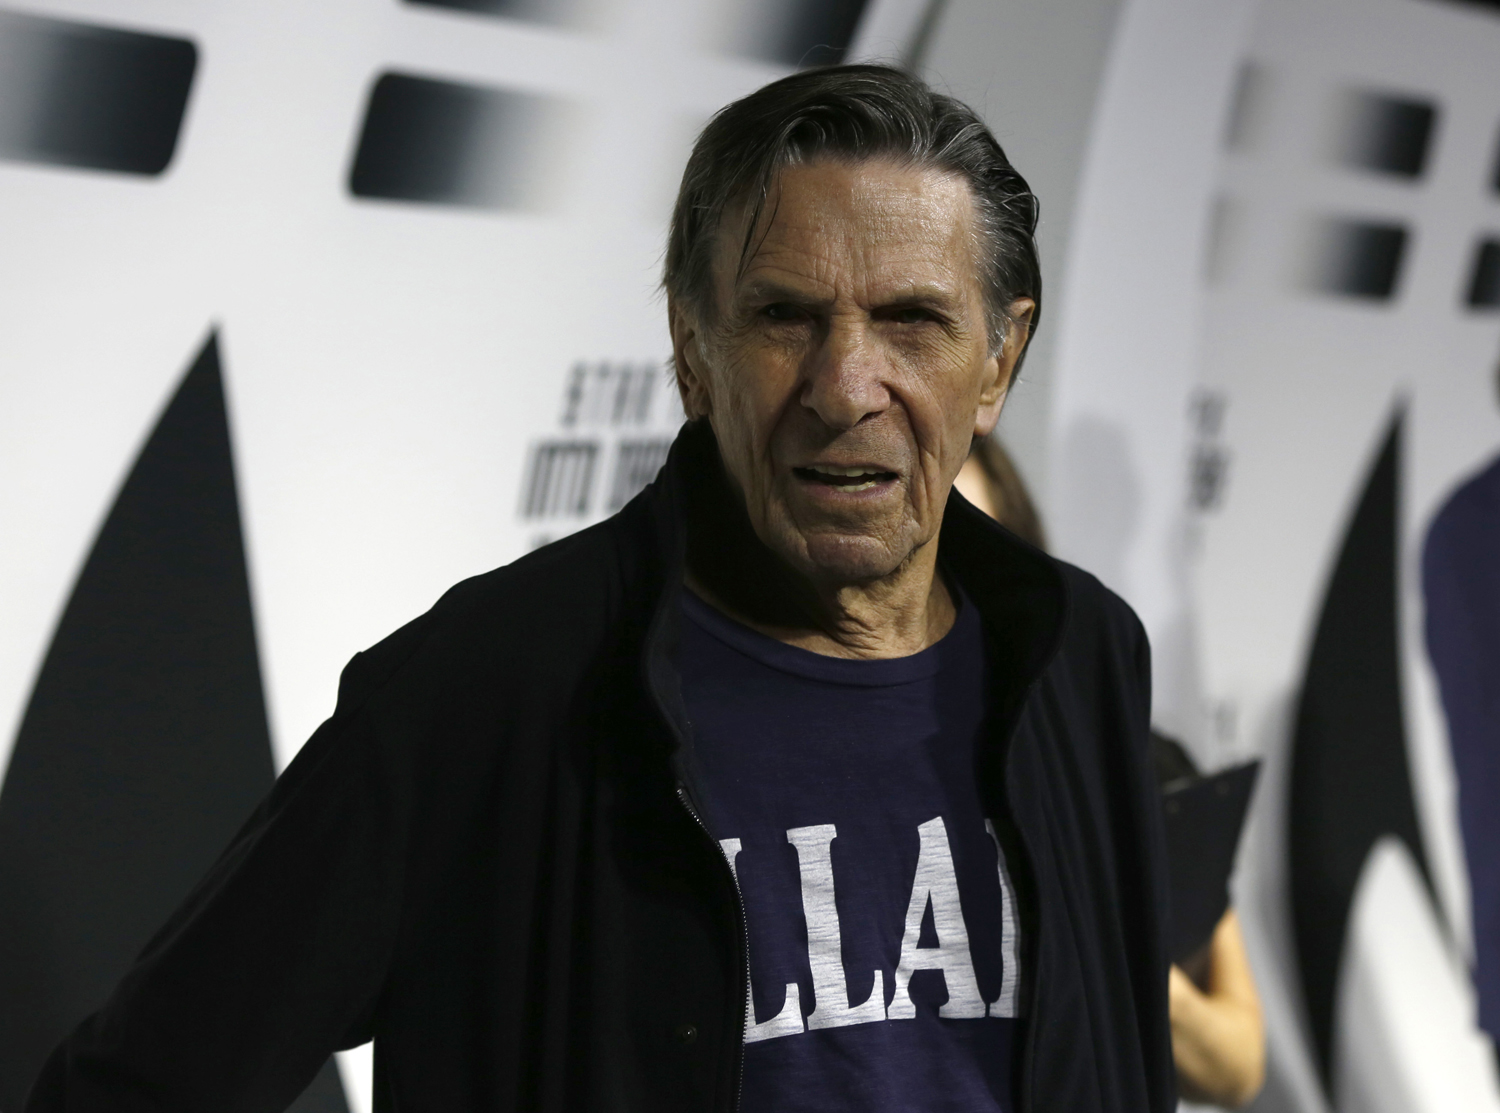 Leonard Nimoy poses at a party celebrating the DVD release of "Star Trek Into Darkness" at the California Science Center in Los Angeles, California on Sept. 10, 2013 (Mario Anzuoni—Reuters)